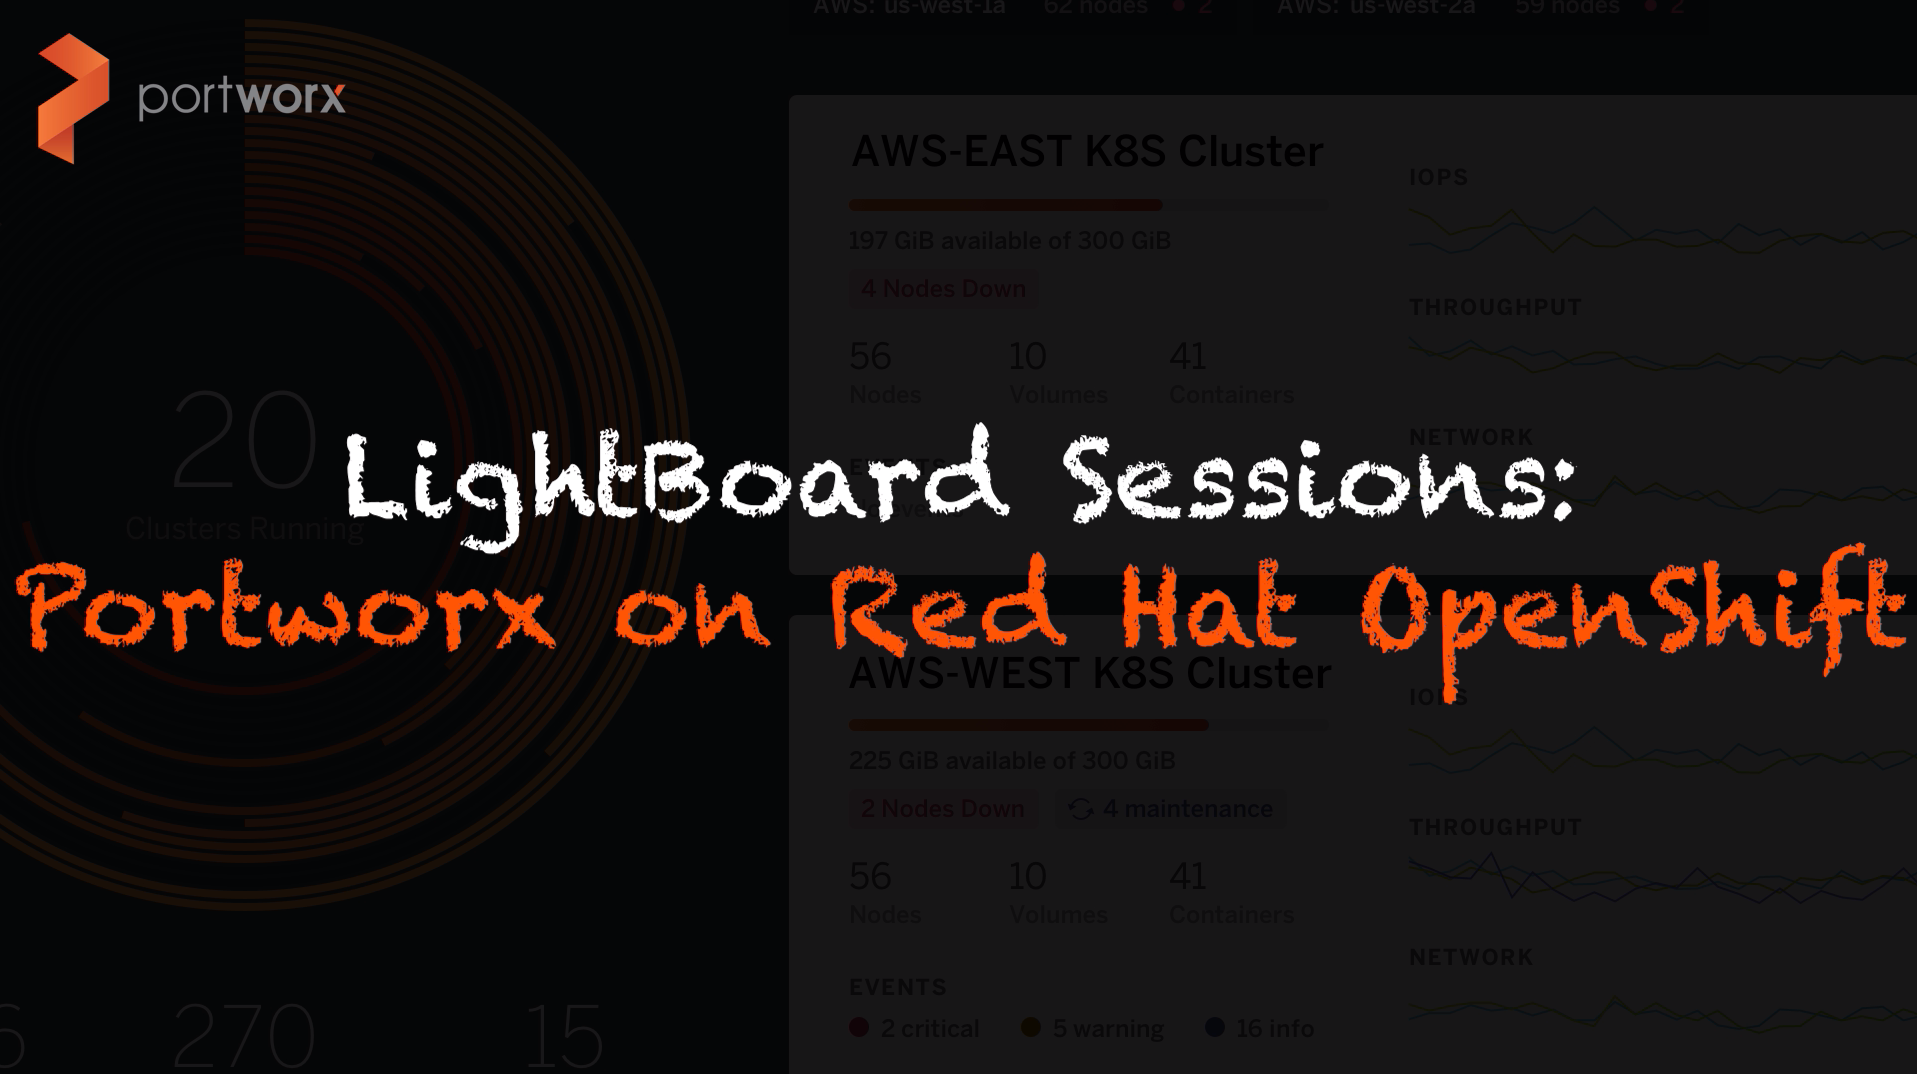 Lightboard Session: Introduction to Portworx Enterprise on Red Hat OpenShift